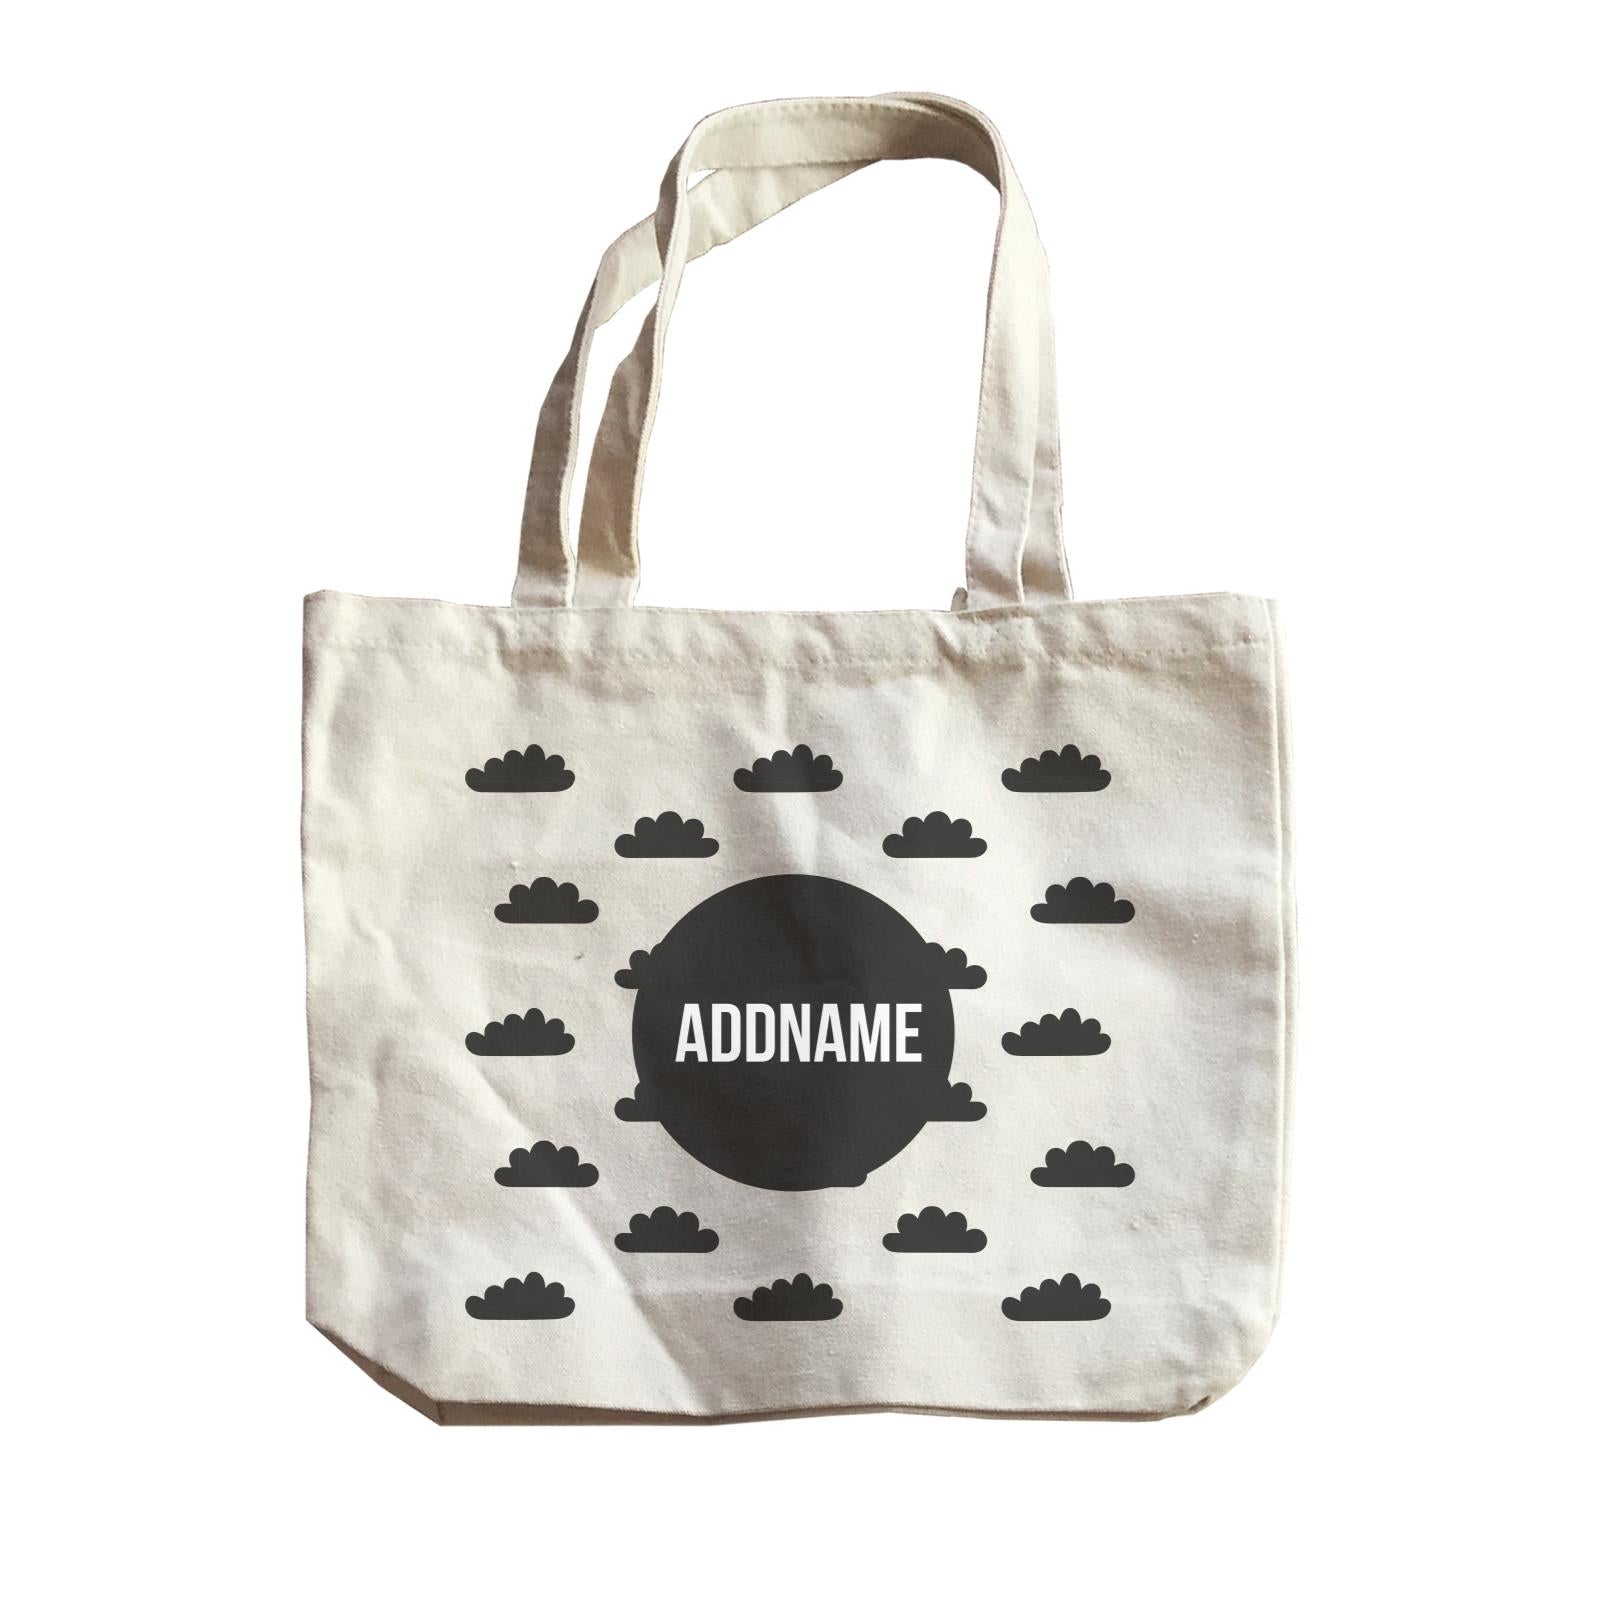 Monochrome Black Circle with Clouds Addname Canvas Bag